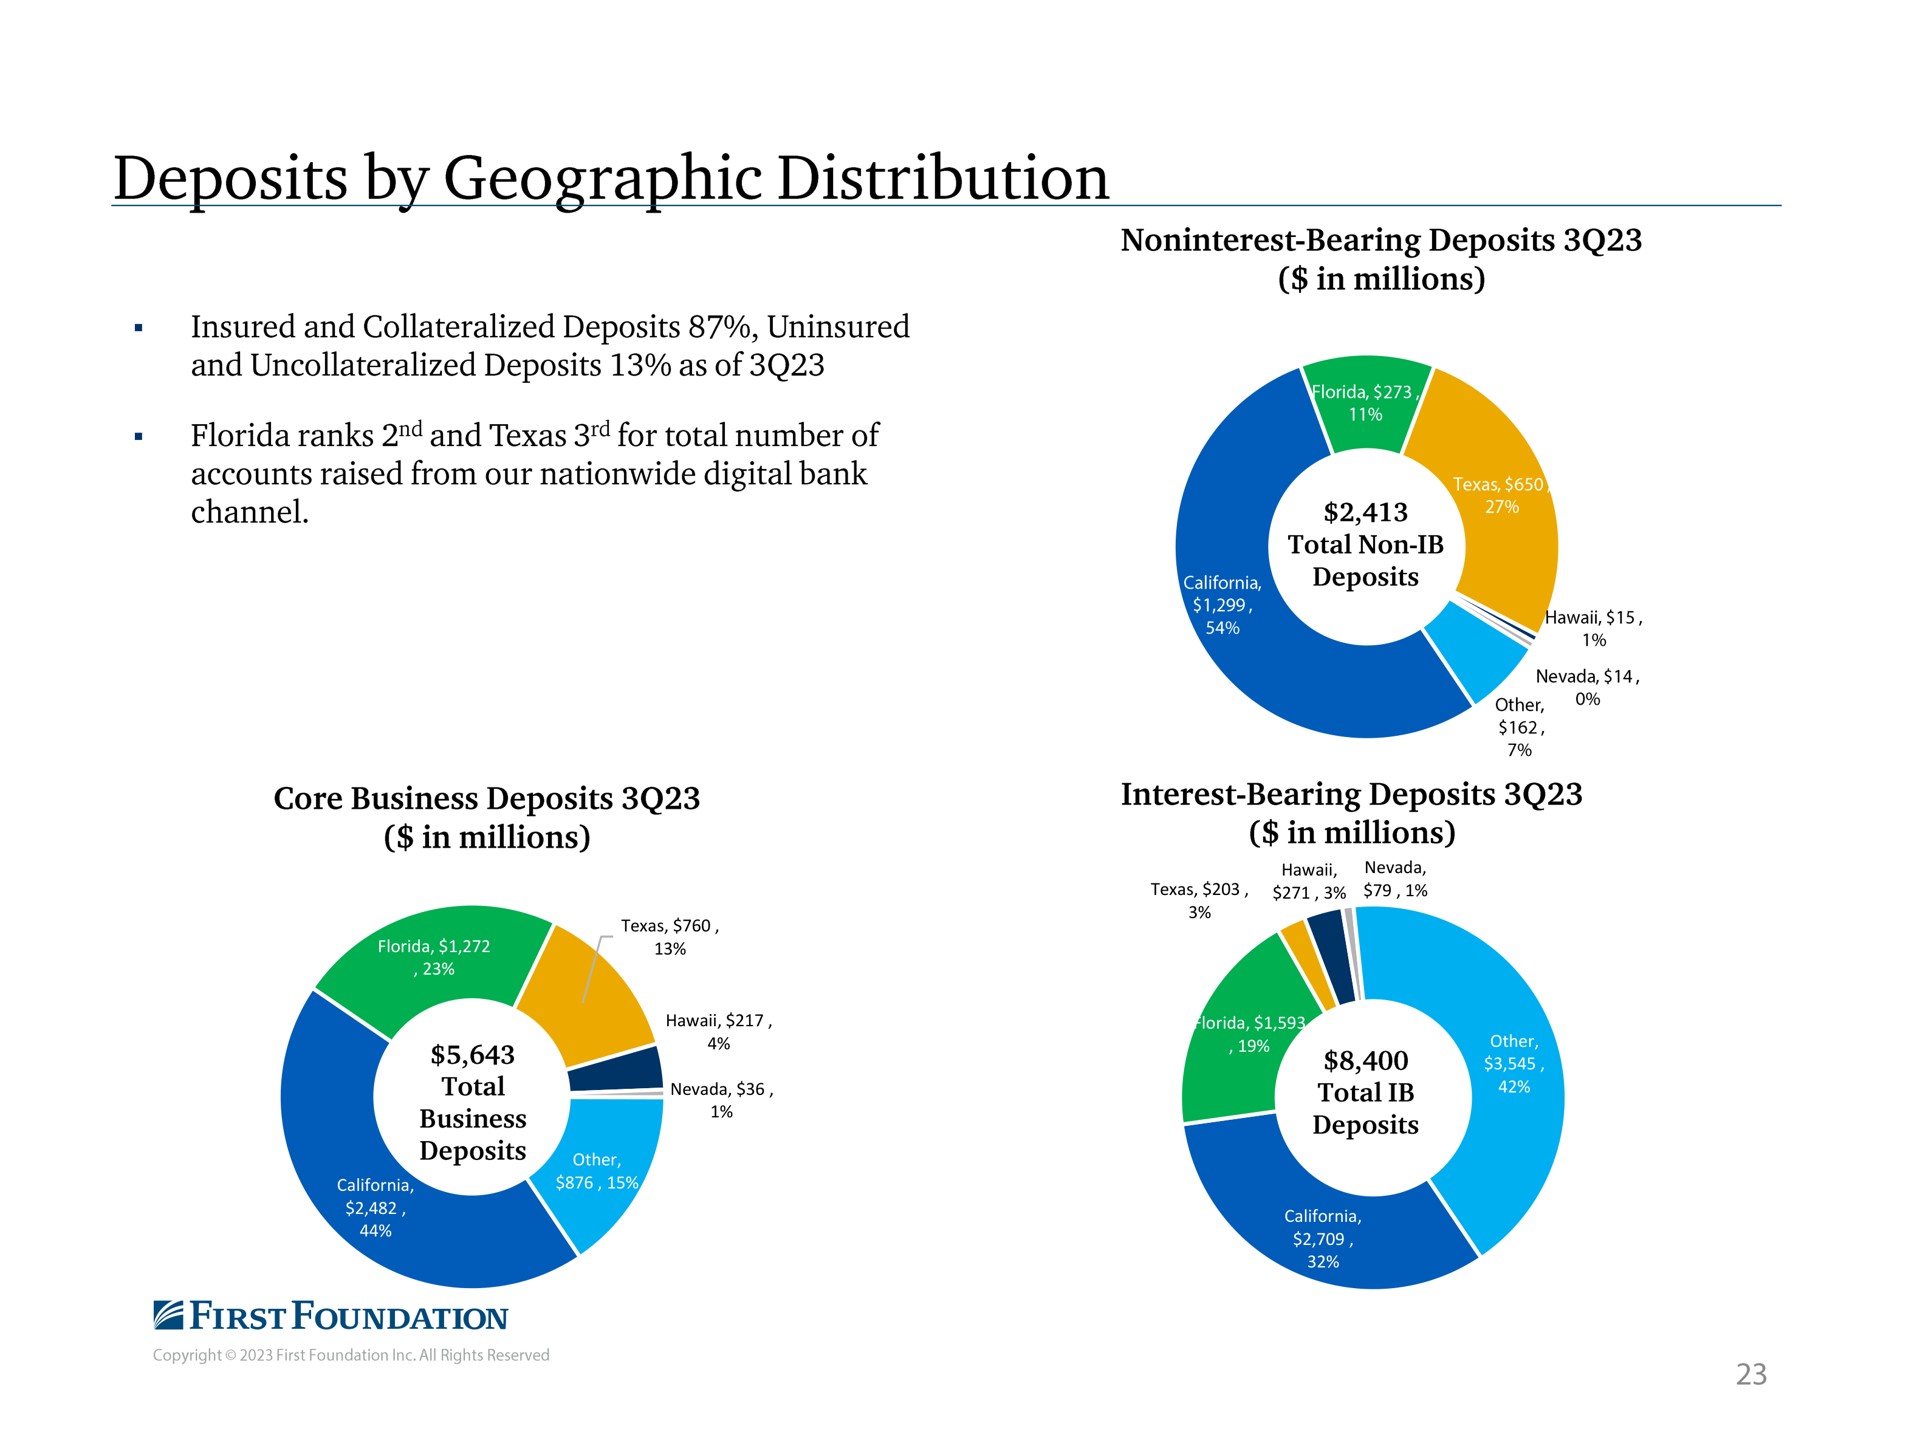 deposits by geographic distribution first foundation | First Foundation